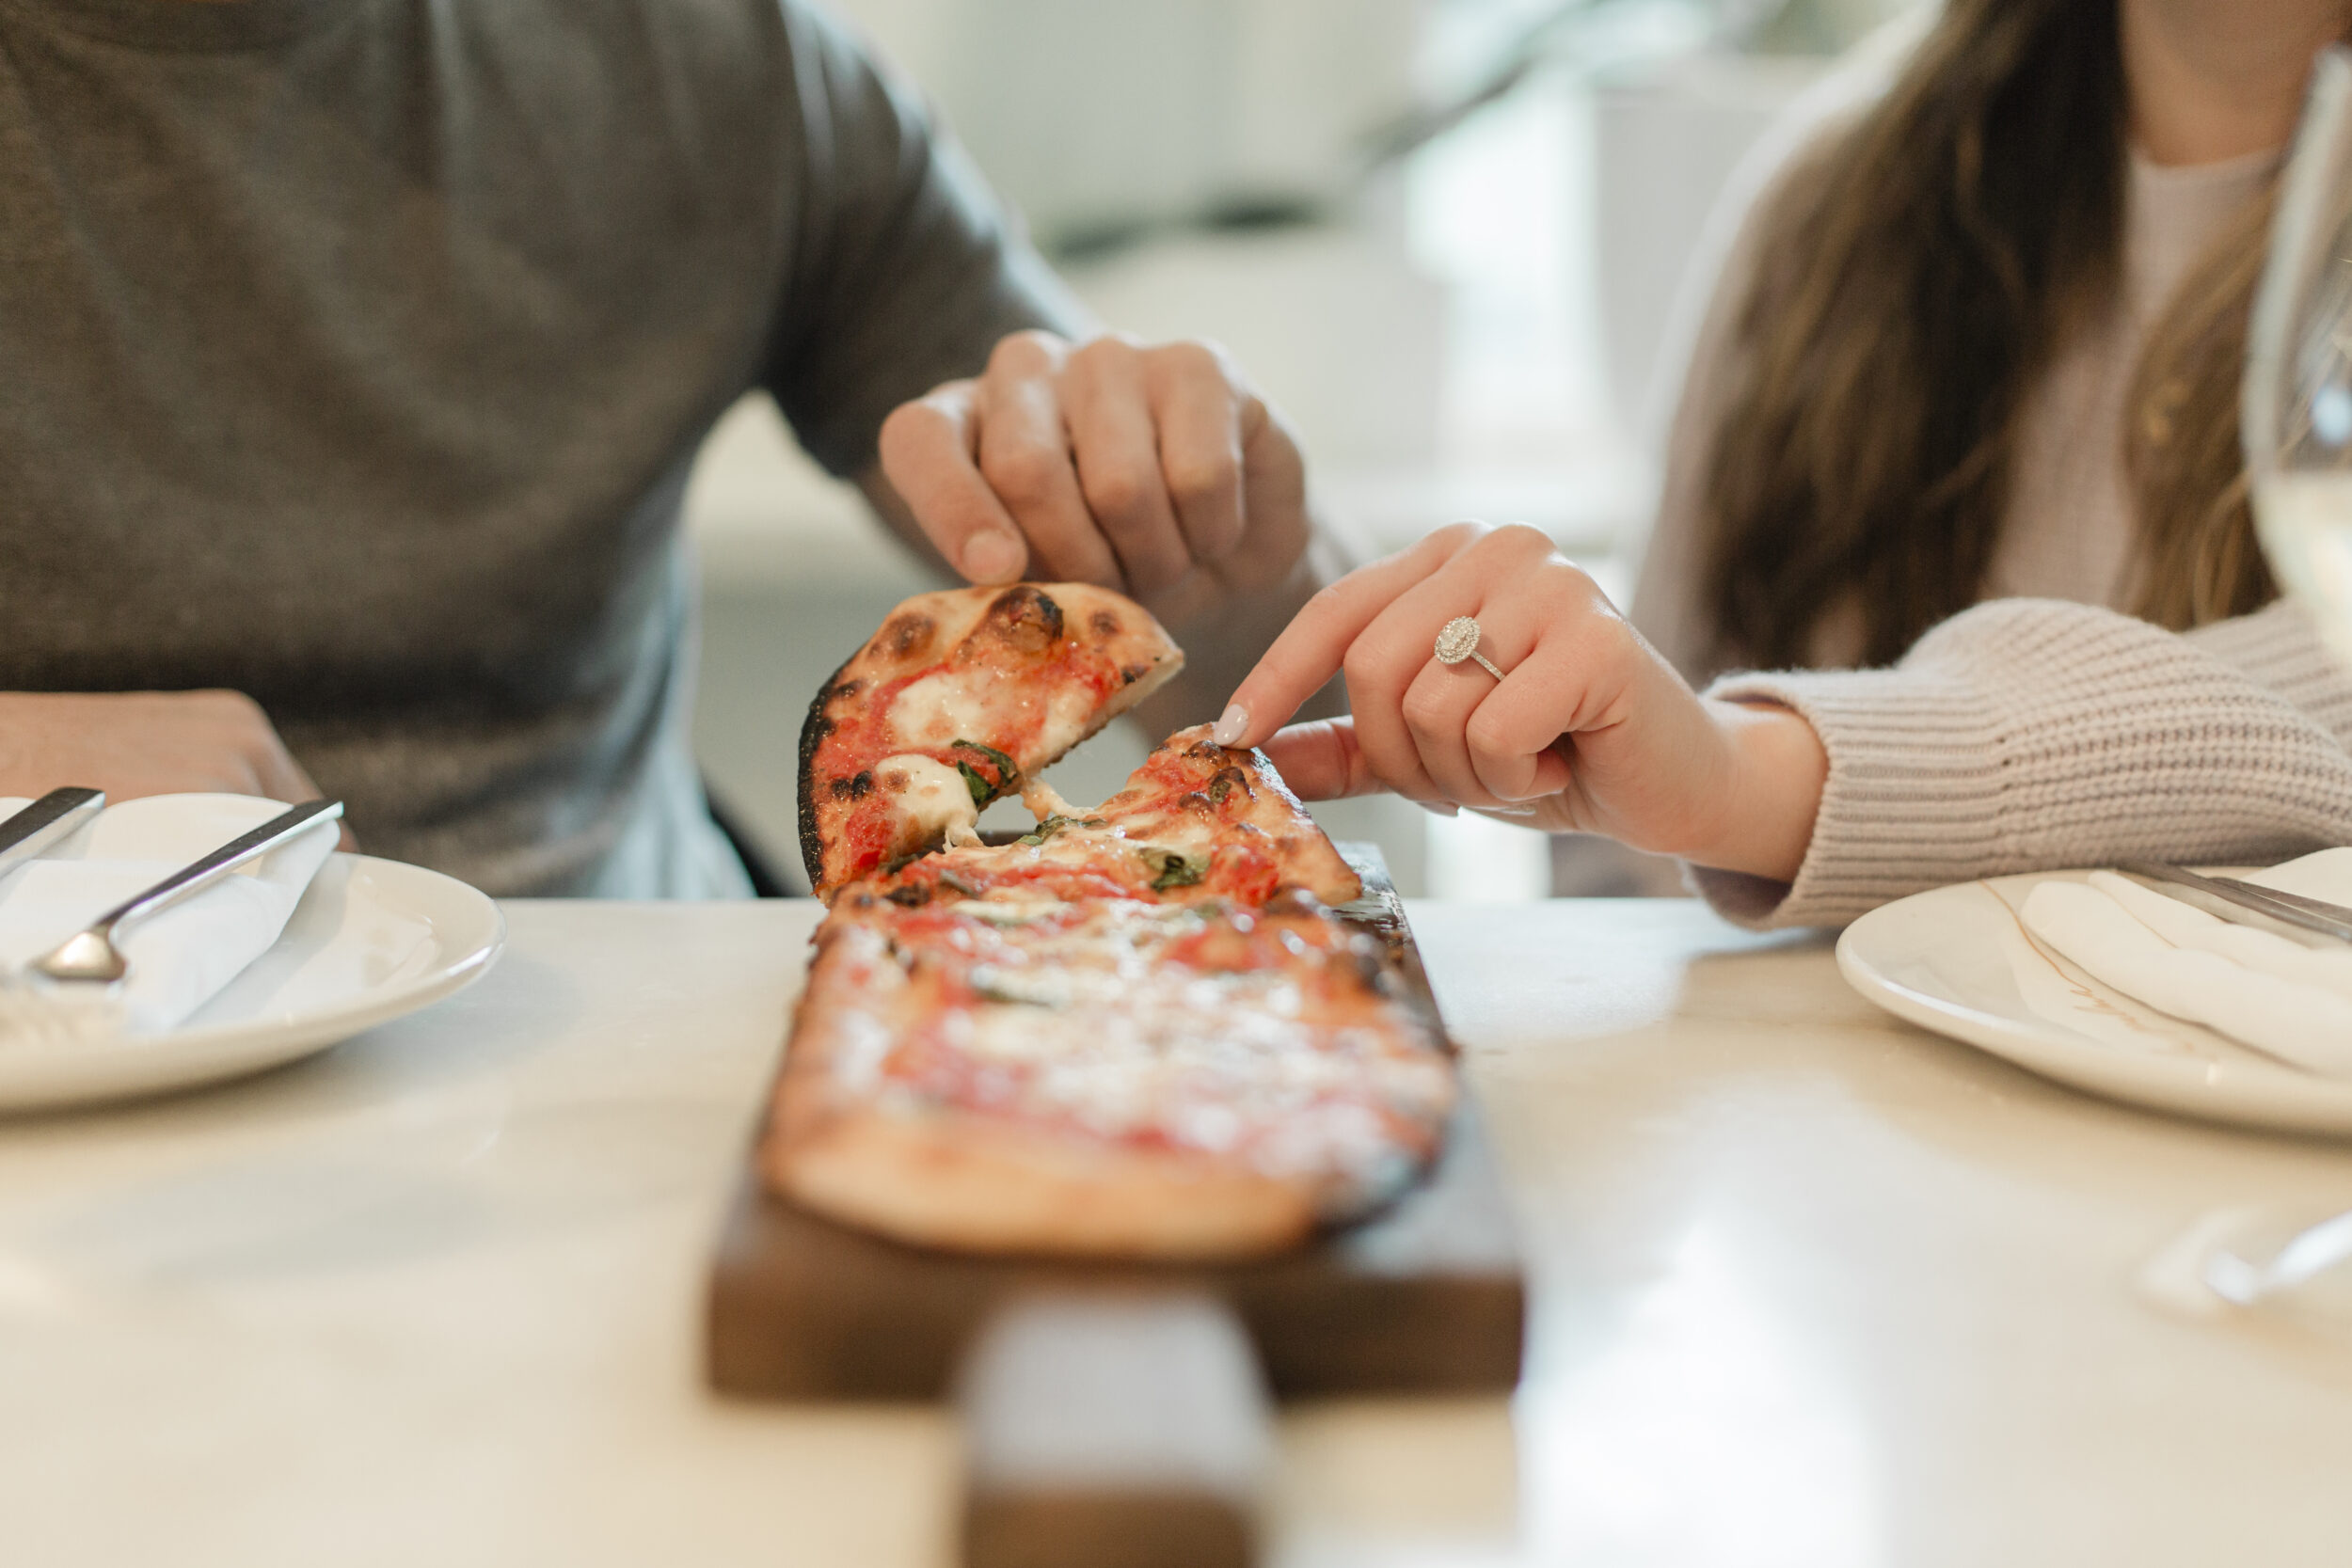 A couple is shown sharing a flatbread pizza in Toronto.